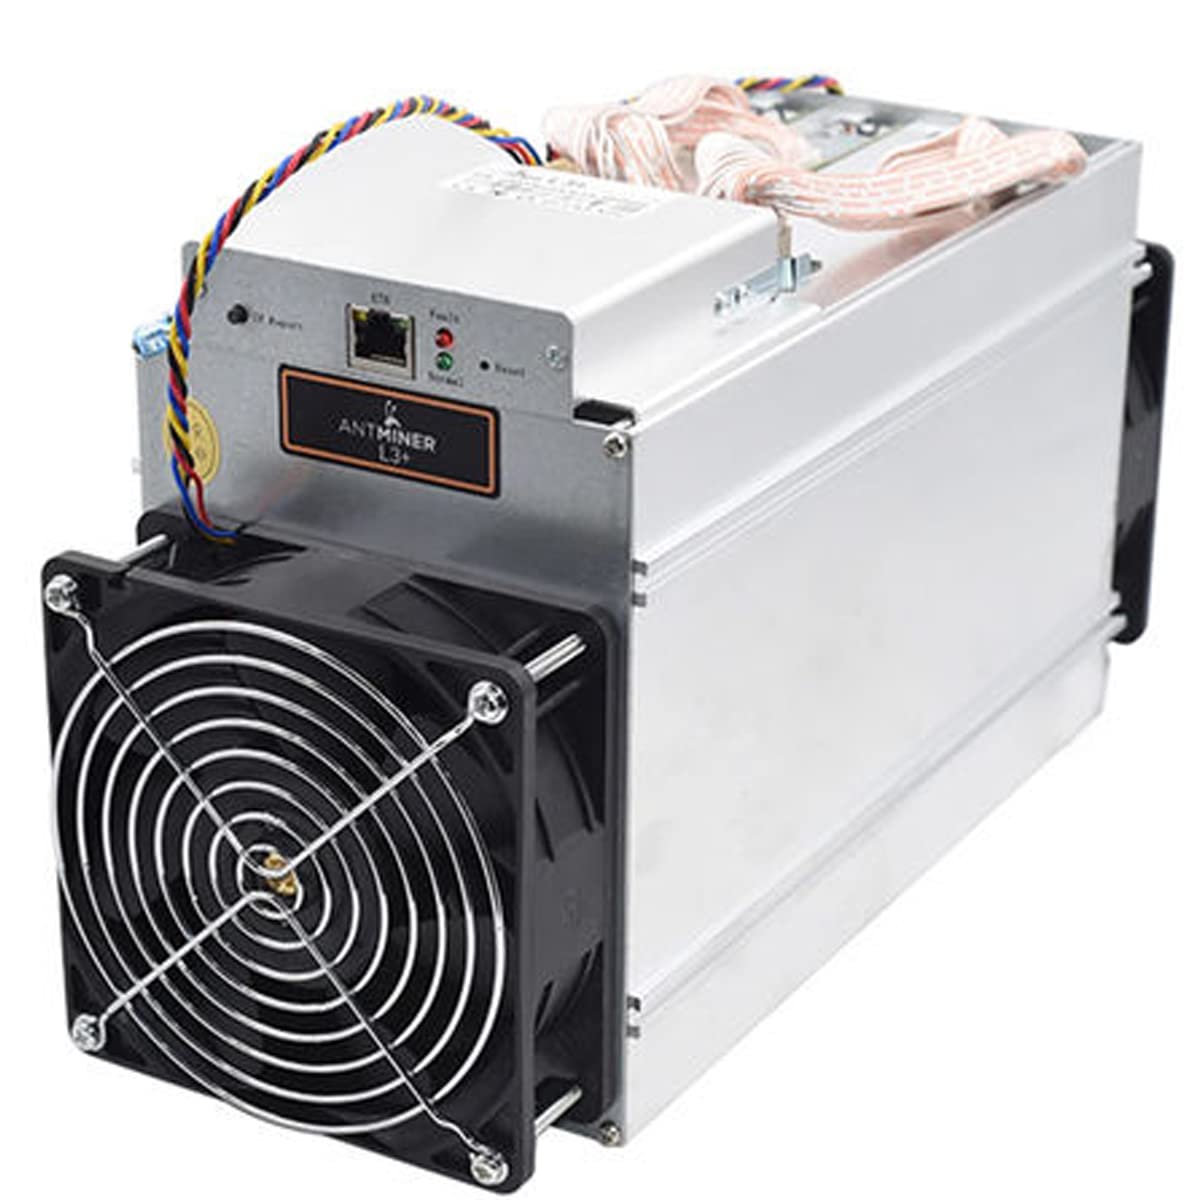 bitcoinhelp.fun: AntMiner L3++ Scrypt ASIC Litecoin Miner (L3++ with PSU) : Electronics